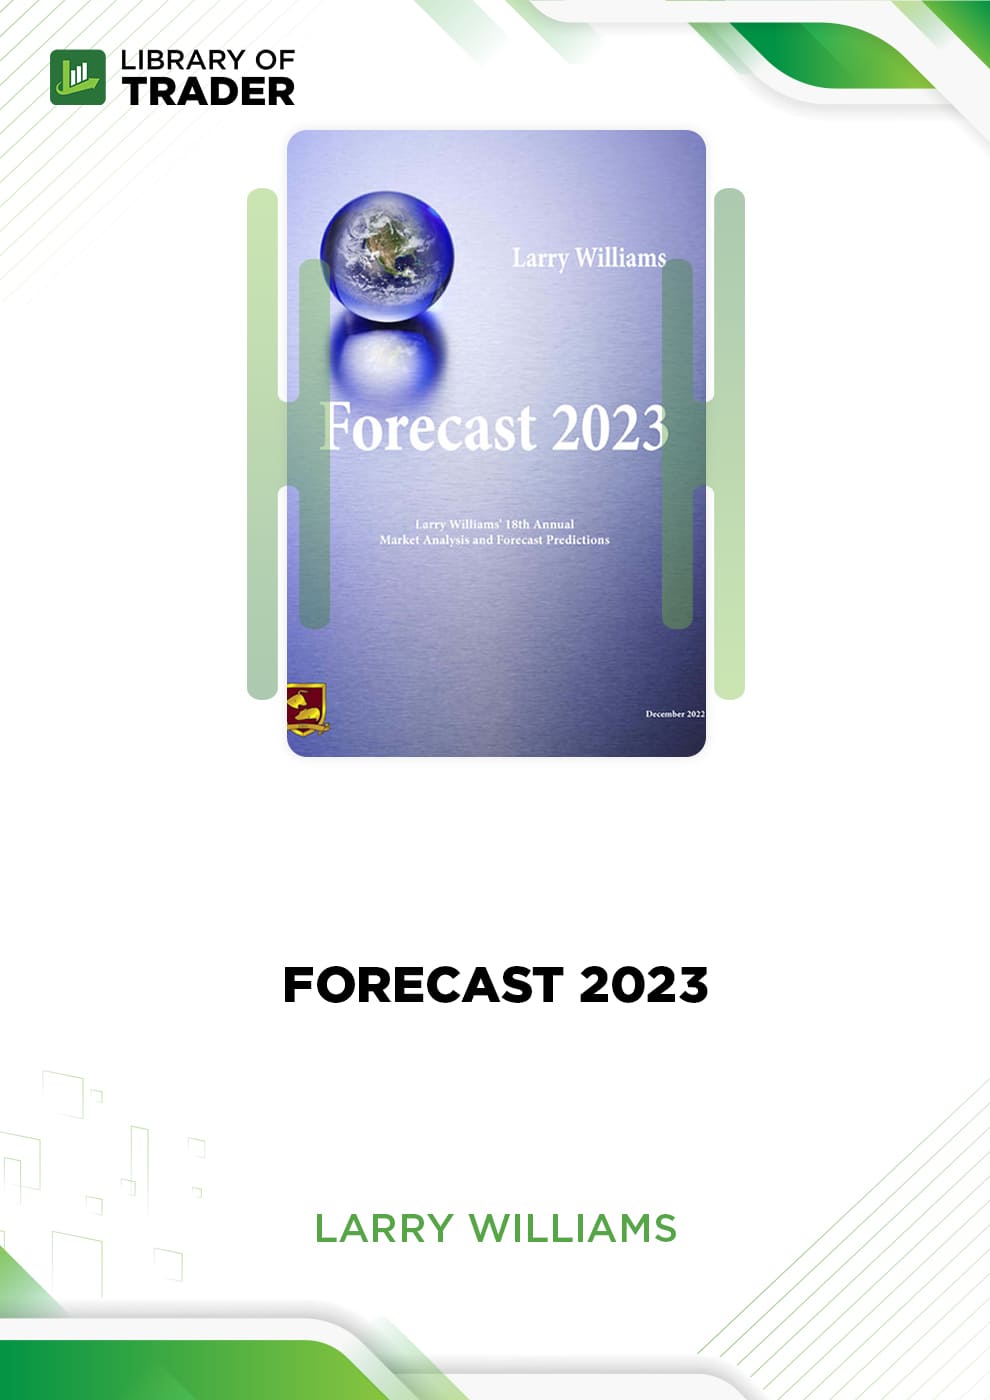 [Download] Forecast 2023 Larry Williams Library of Trader